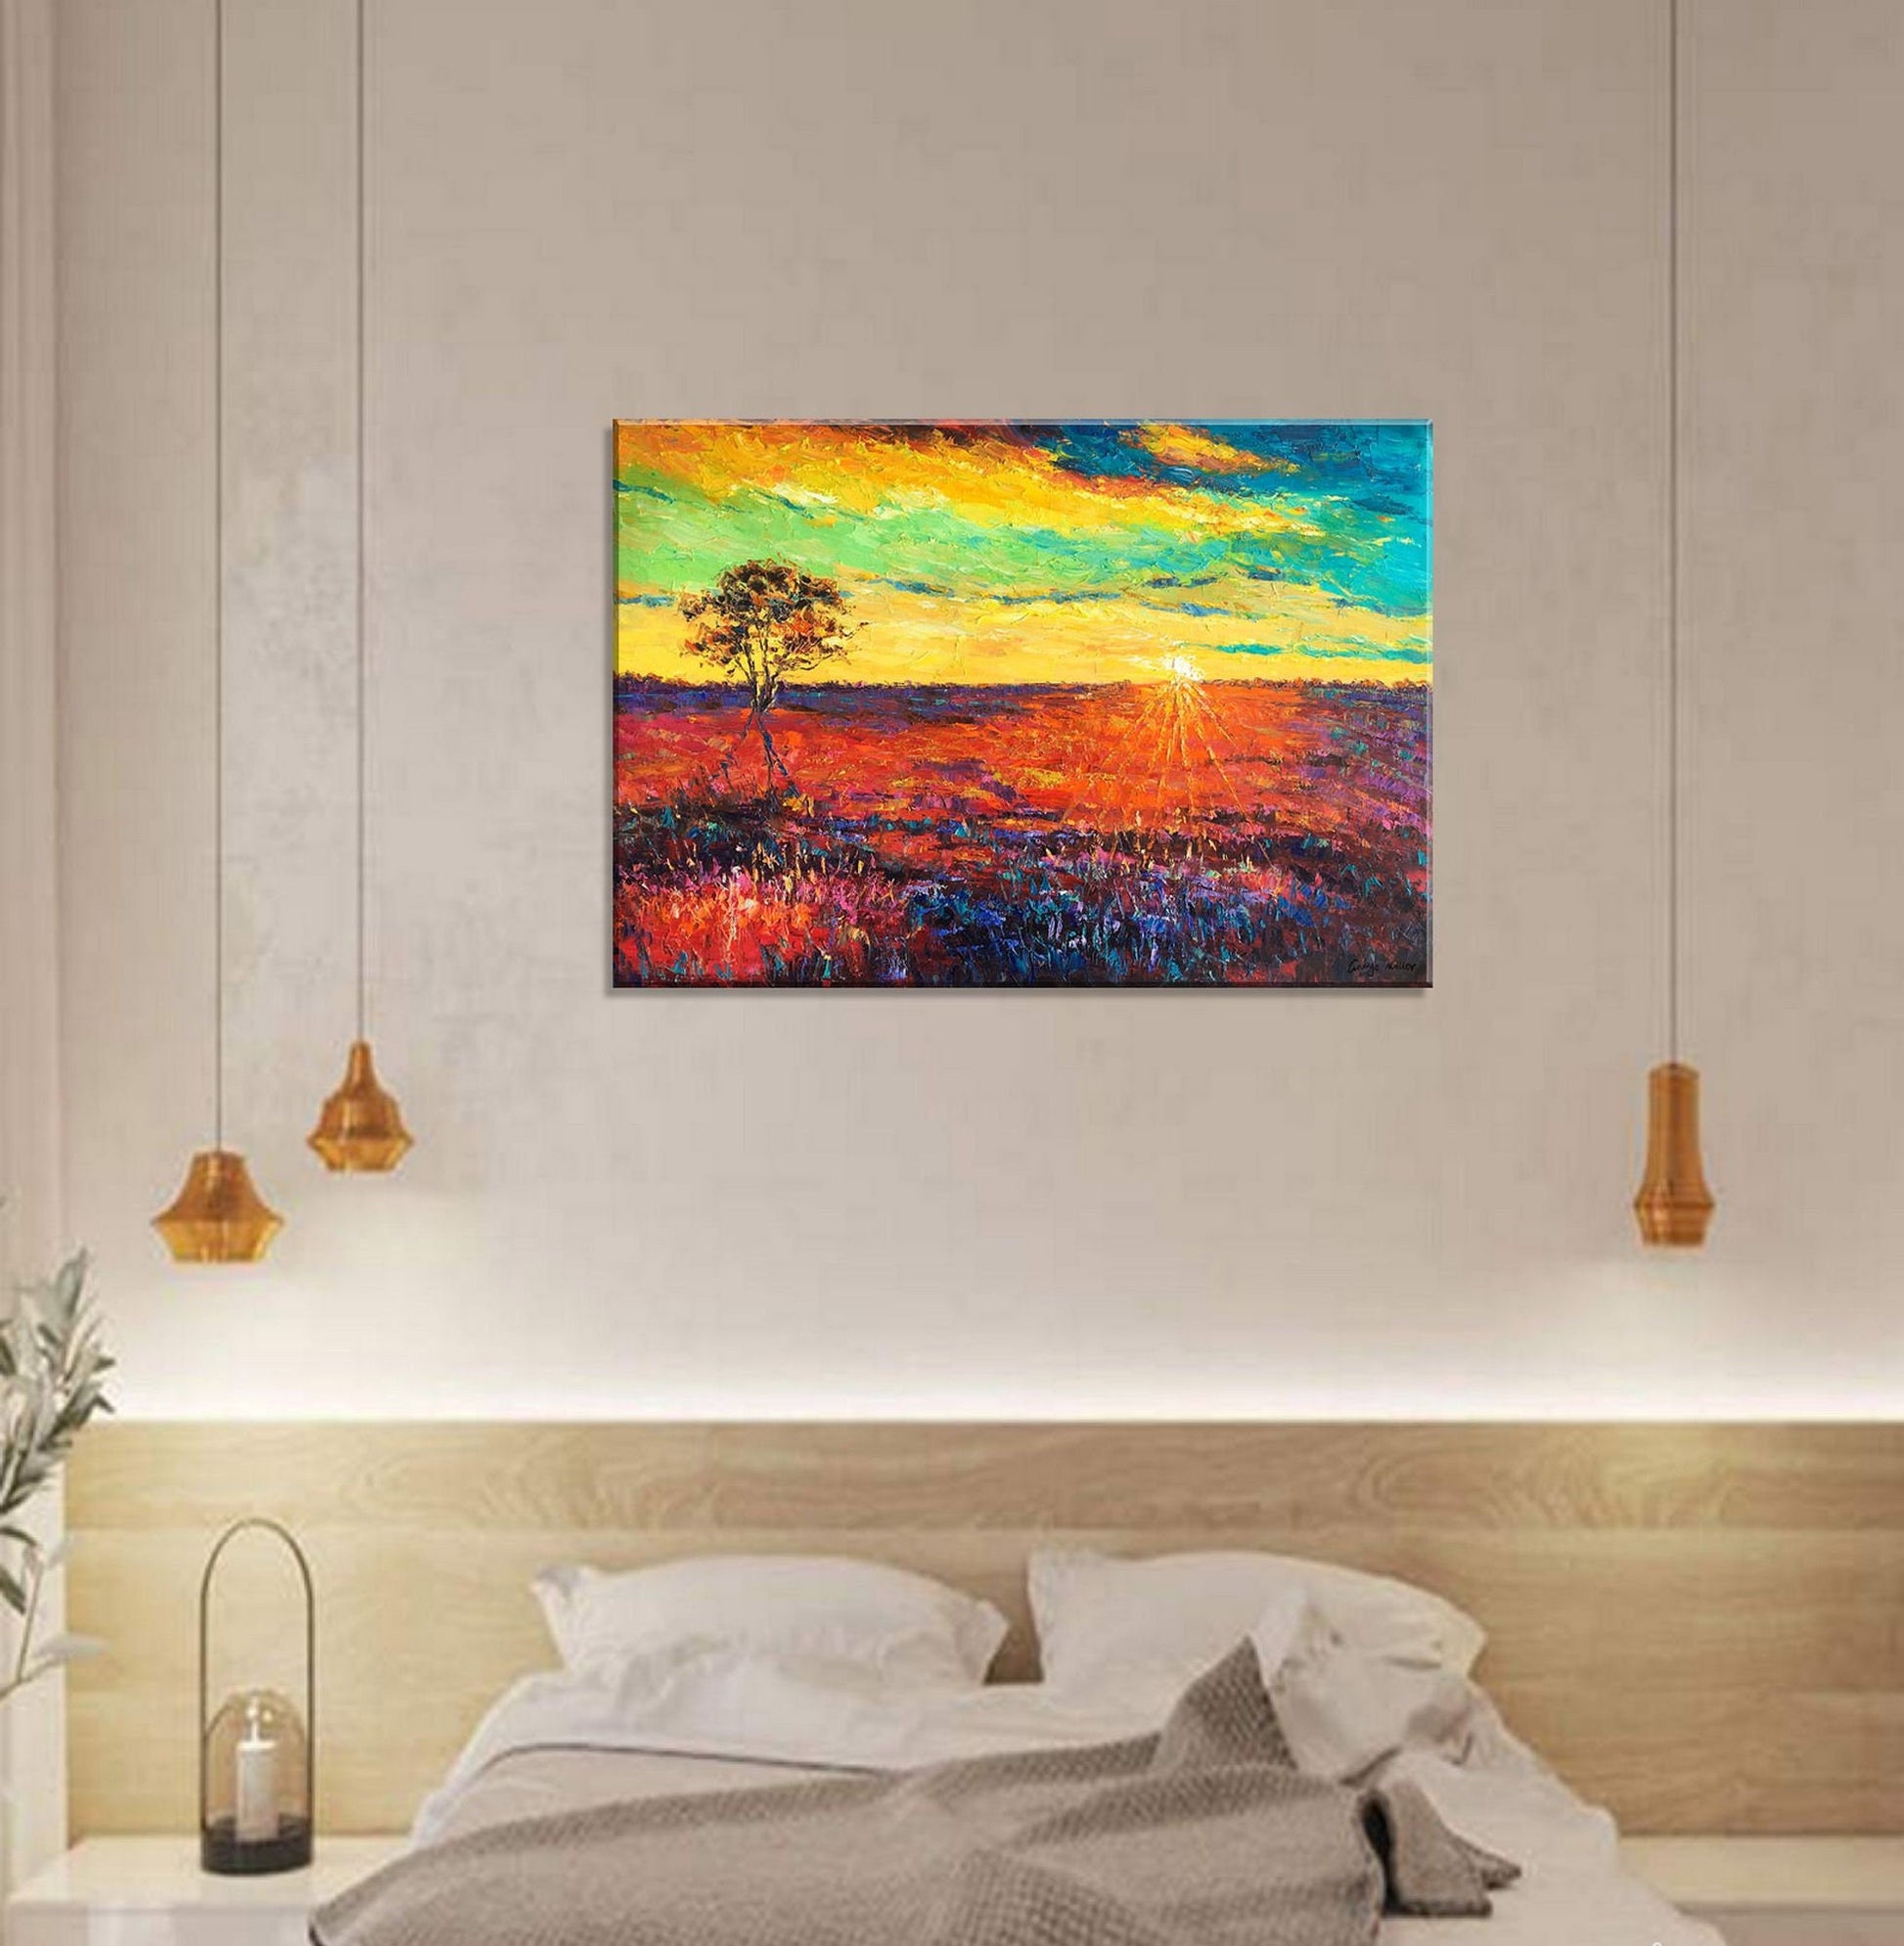 Landscape Oil Painting Tuscany Sunrise, Abstract Painting, Large Canvas Art, Modern Art, Original Oil Painting, Wall Decor, Palette Knife